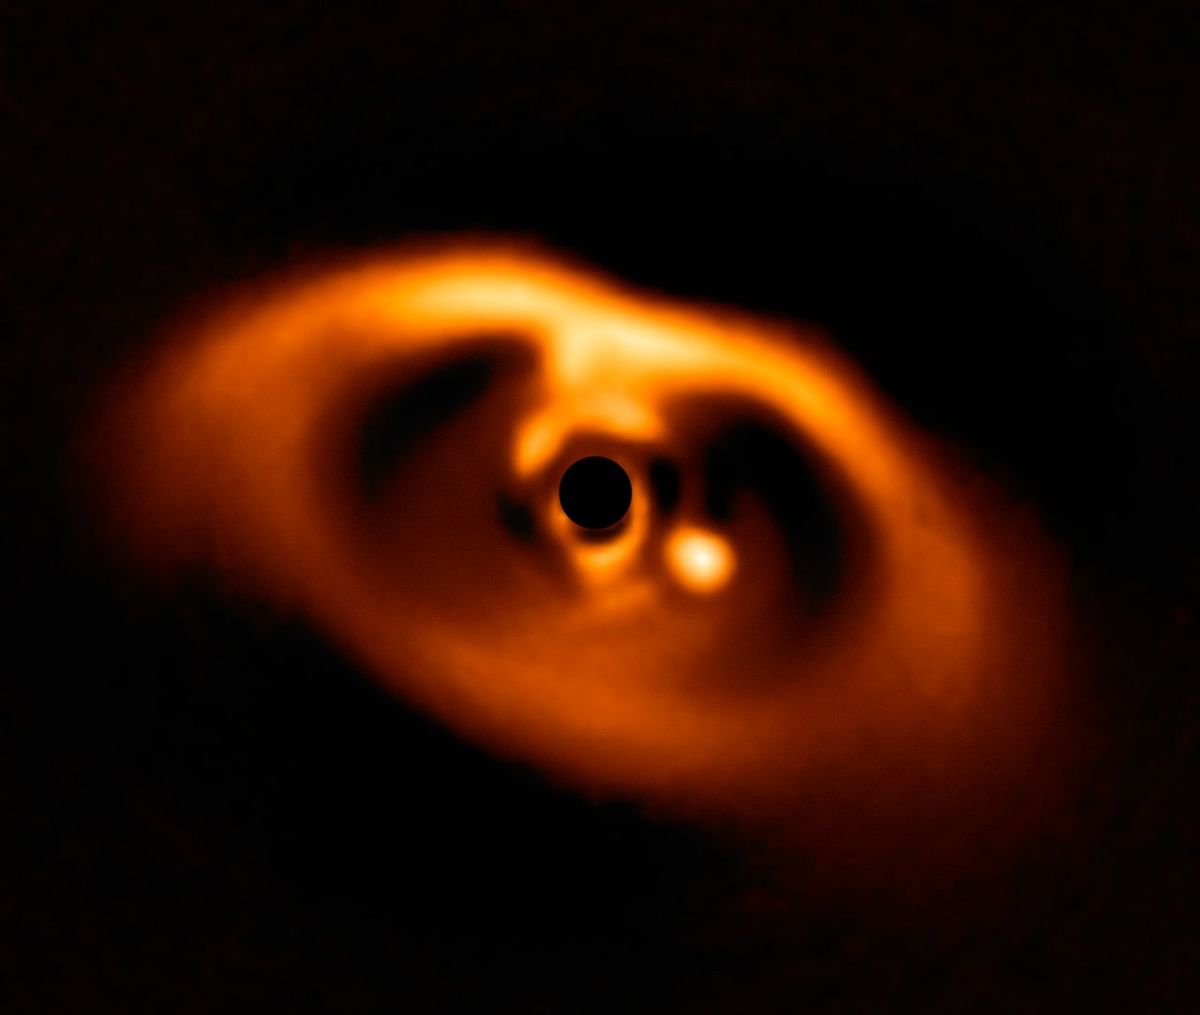 Young planet in formation spotted near dwarf star